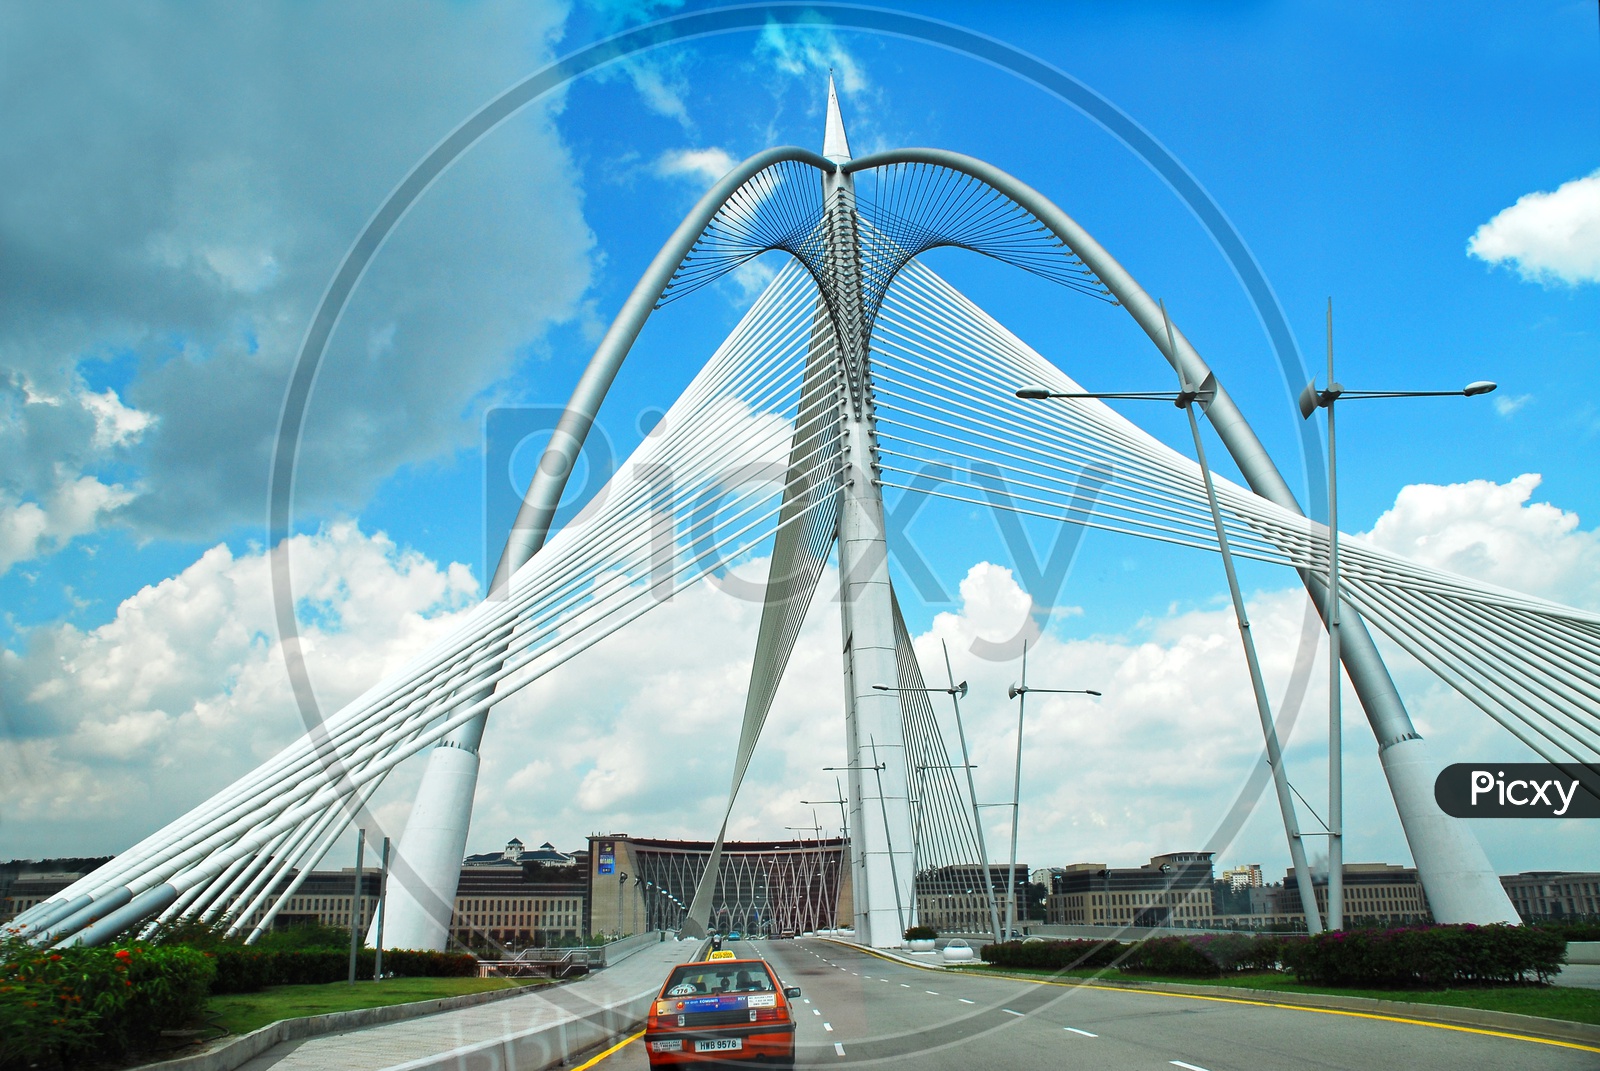 An Arch Architecture With Suspension Cables